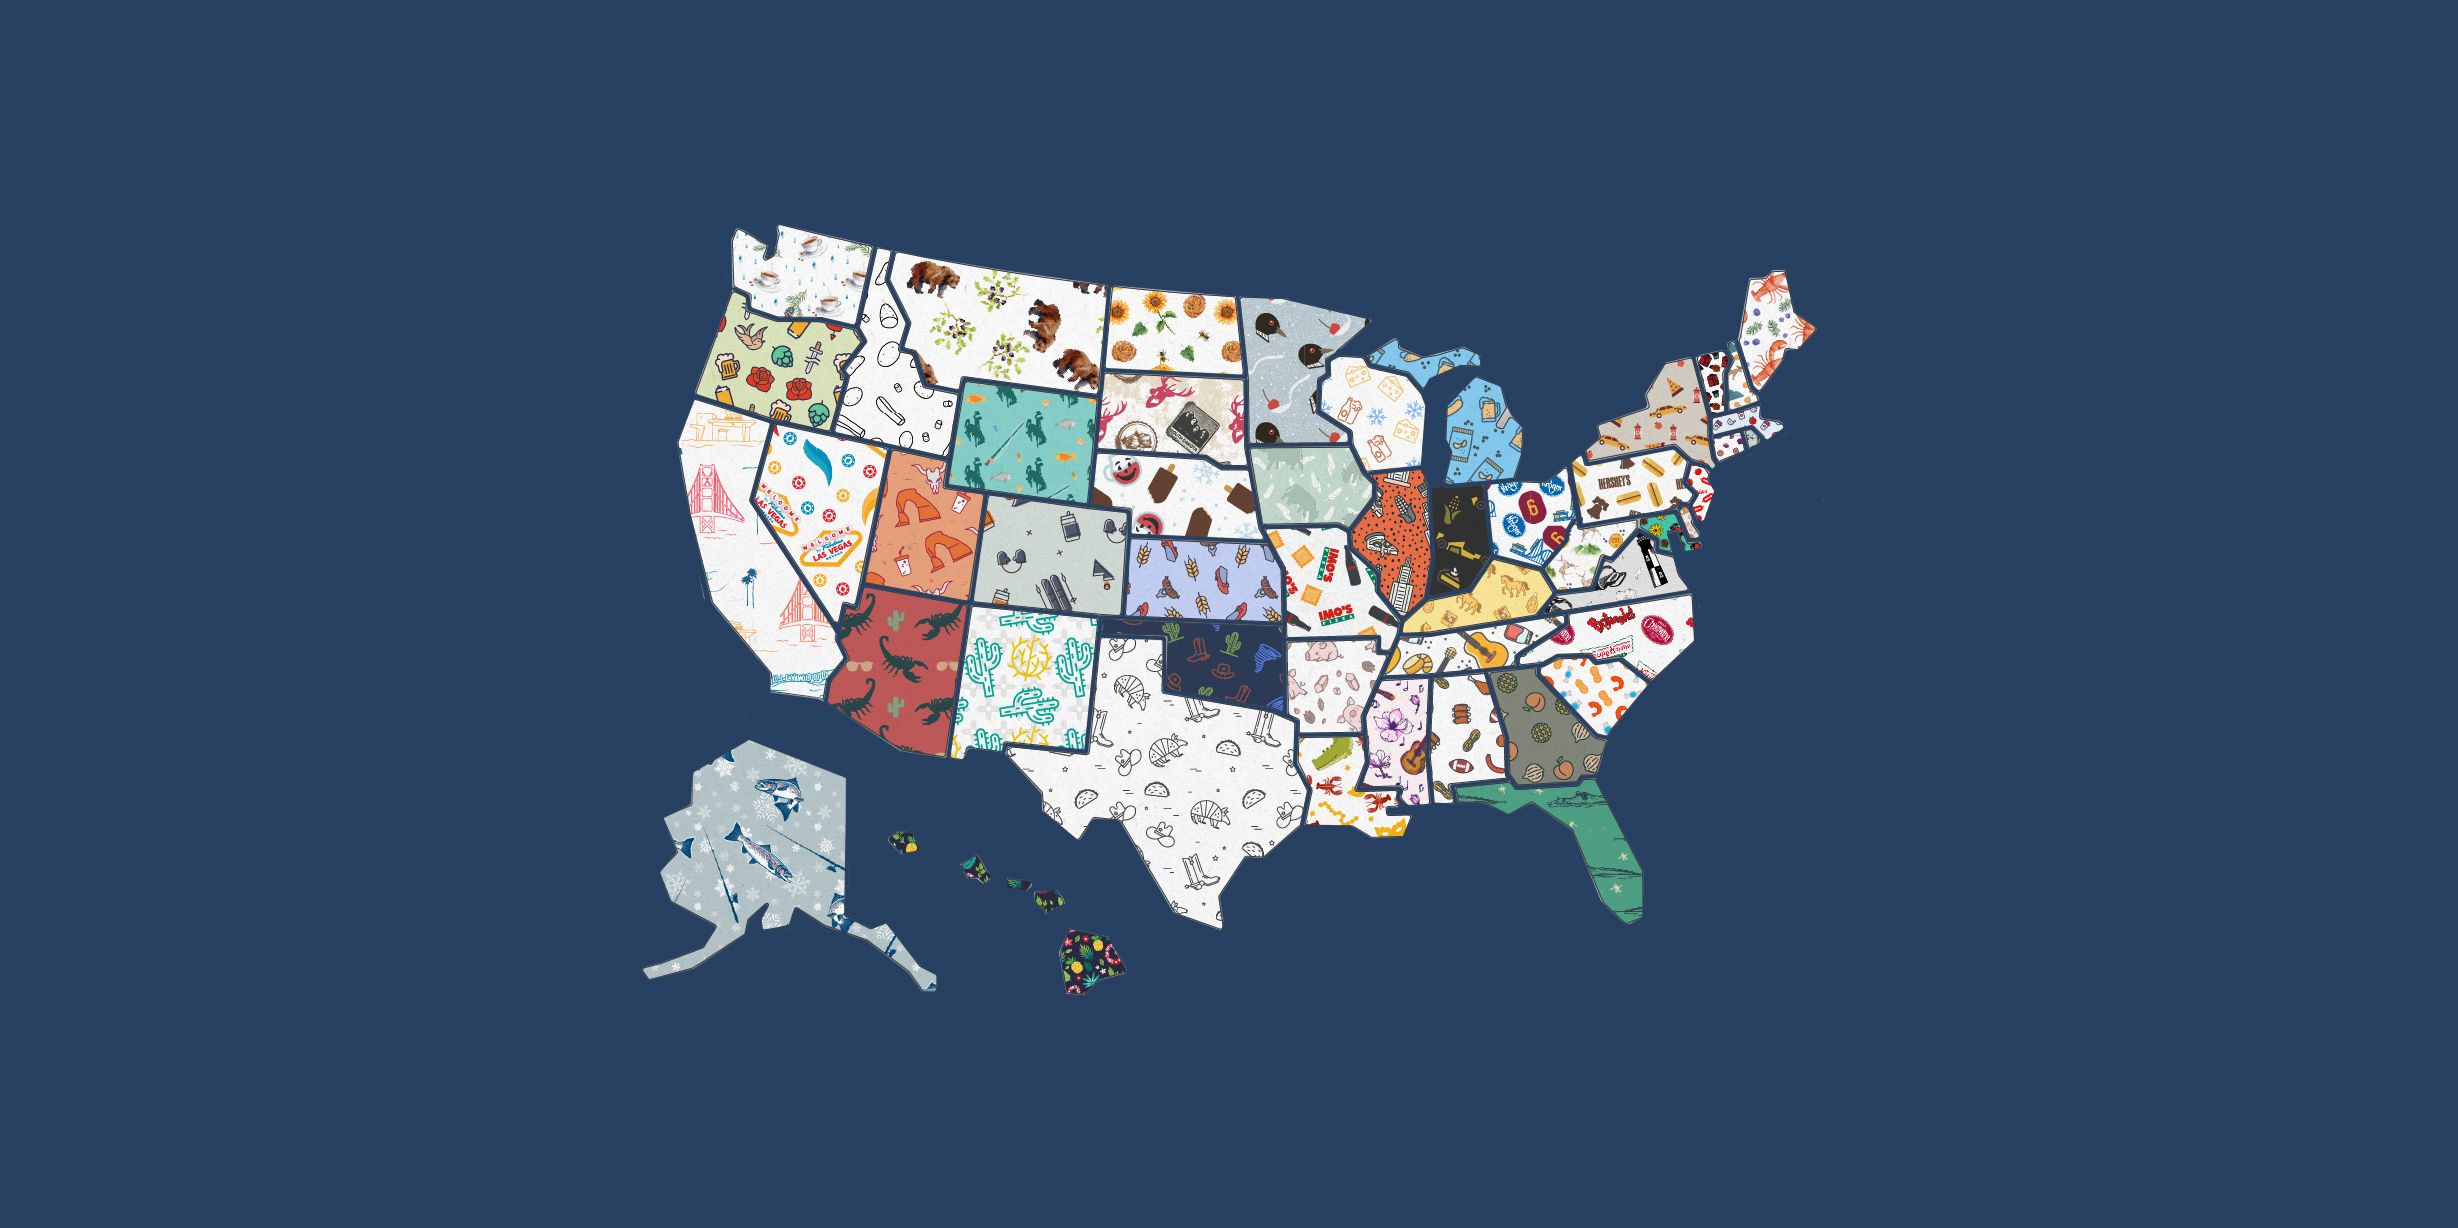 2458x1228 These State-Themed Wallpapers Feature on Iconic Things Every State Is Known for